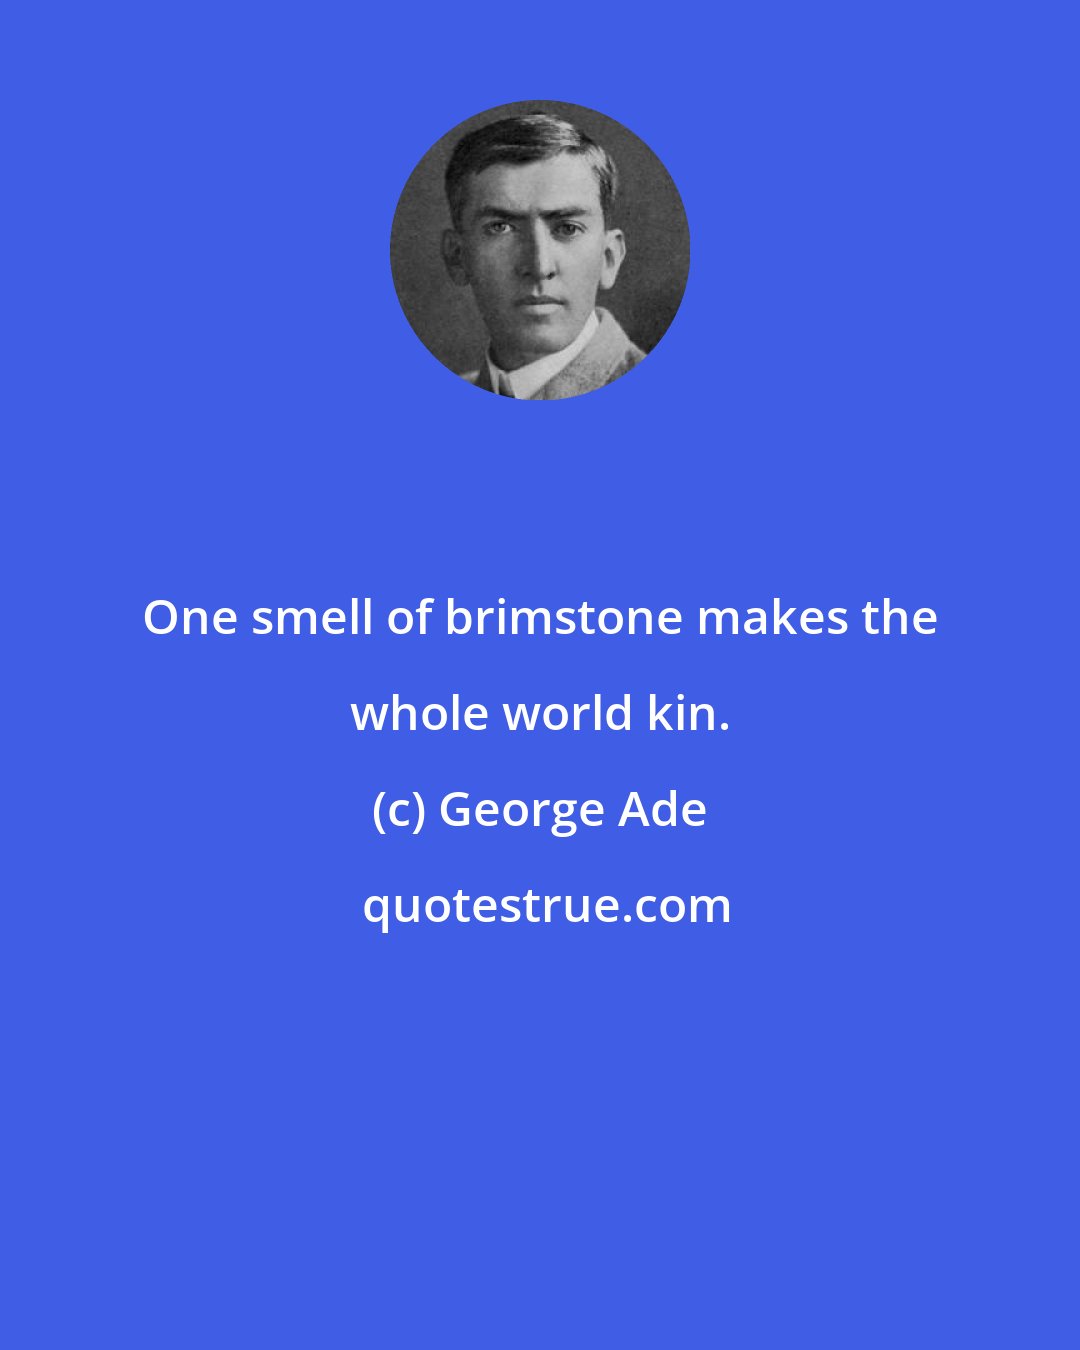 George Ade: One smell of brimstone makes the whole world kin.